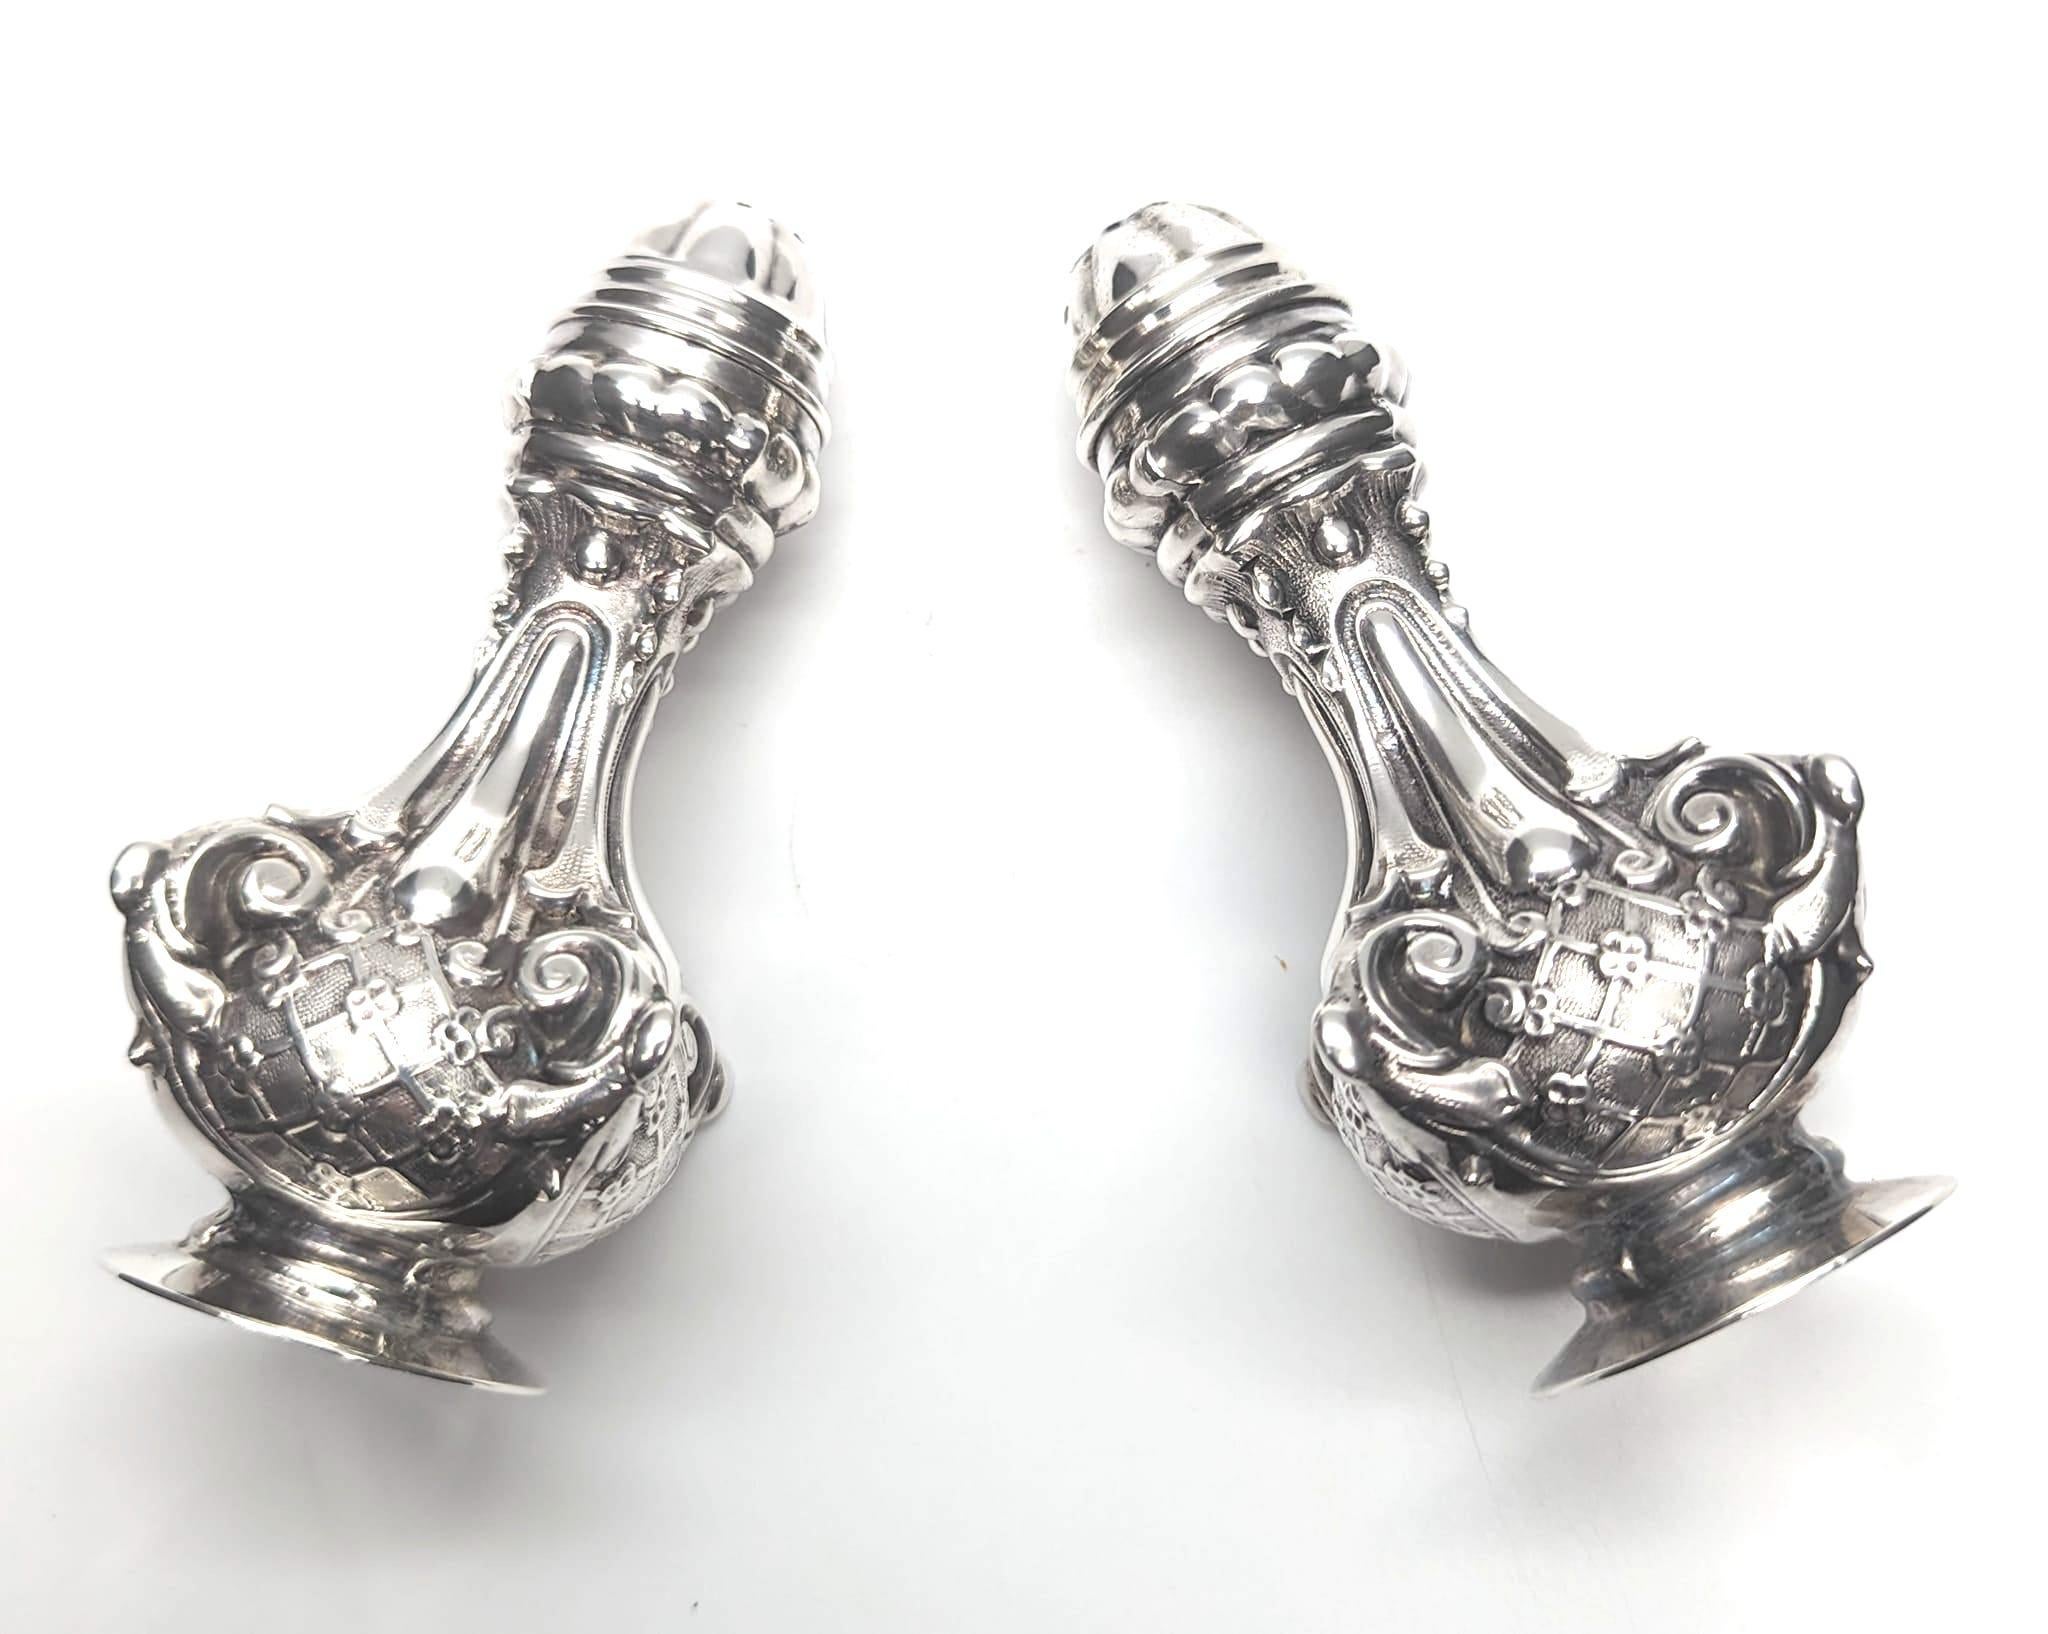 Unknown Vintage Hazorfim Sterling Silver Salt & Pepper Shakers, a Pair For Sale